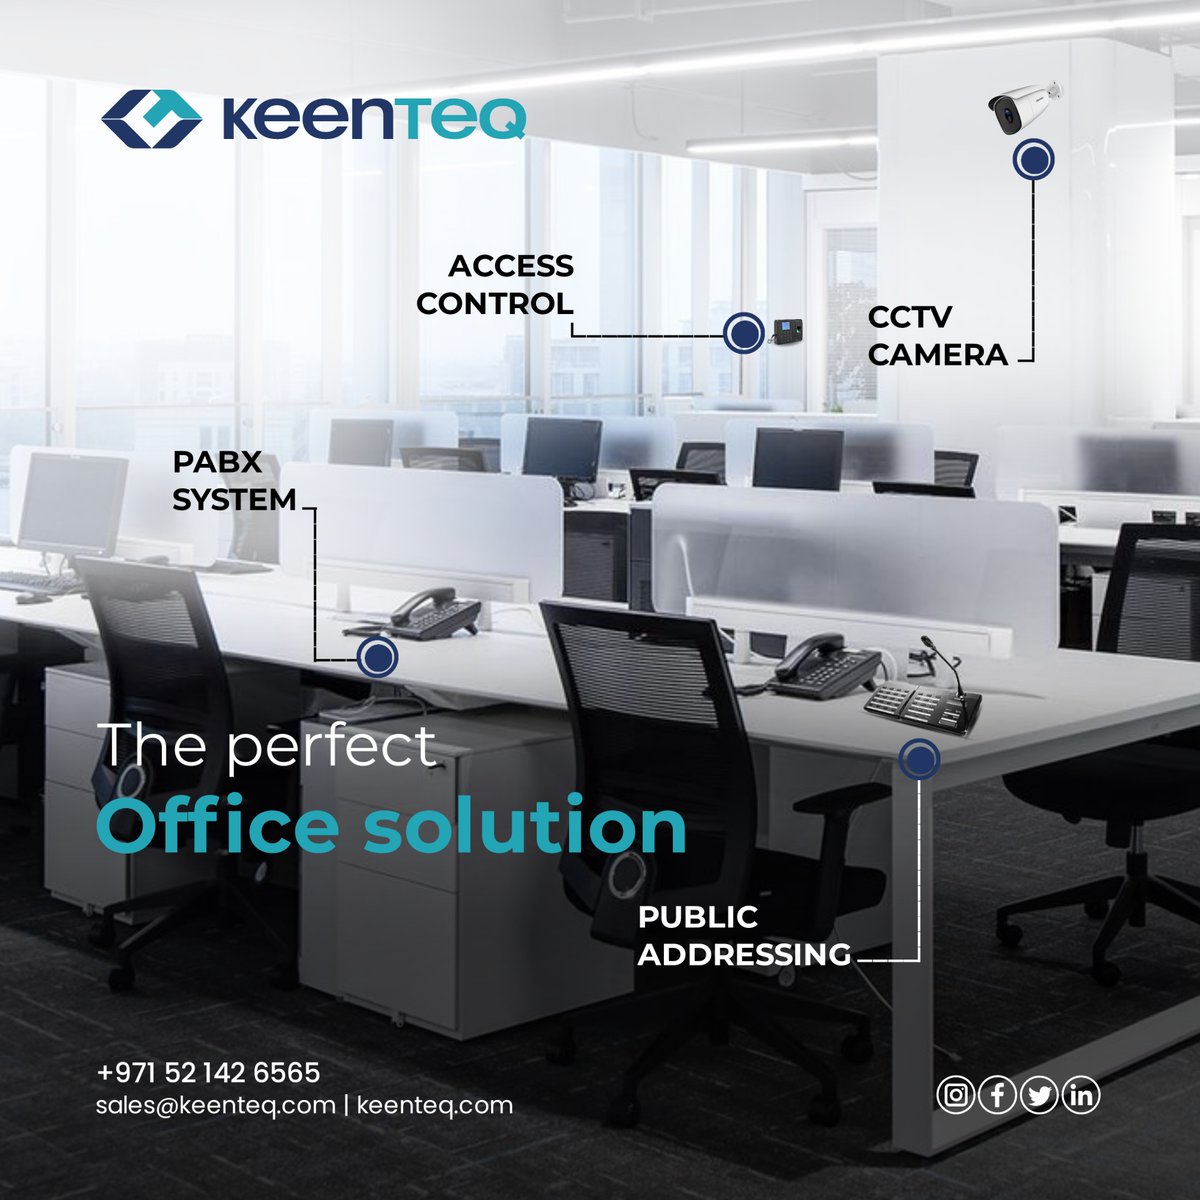 Transform your office into a secure, efficient, and connected hub with our top-notch office solutions.

#accesscontrol #cctv #timeattendancesystem #pabx #publicaddressing #officesolutions #secureworkspace #keenteq